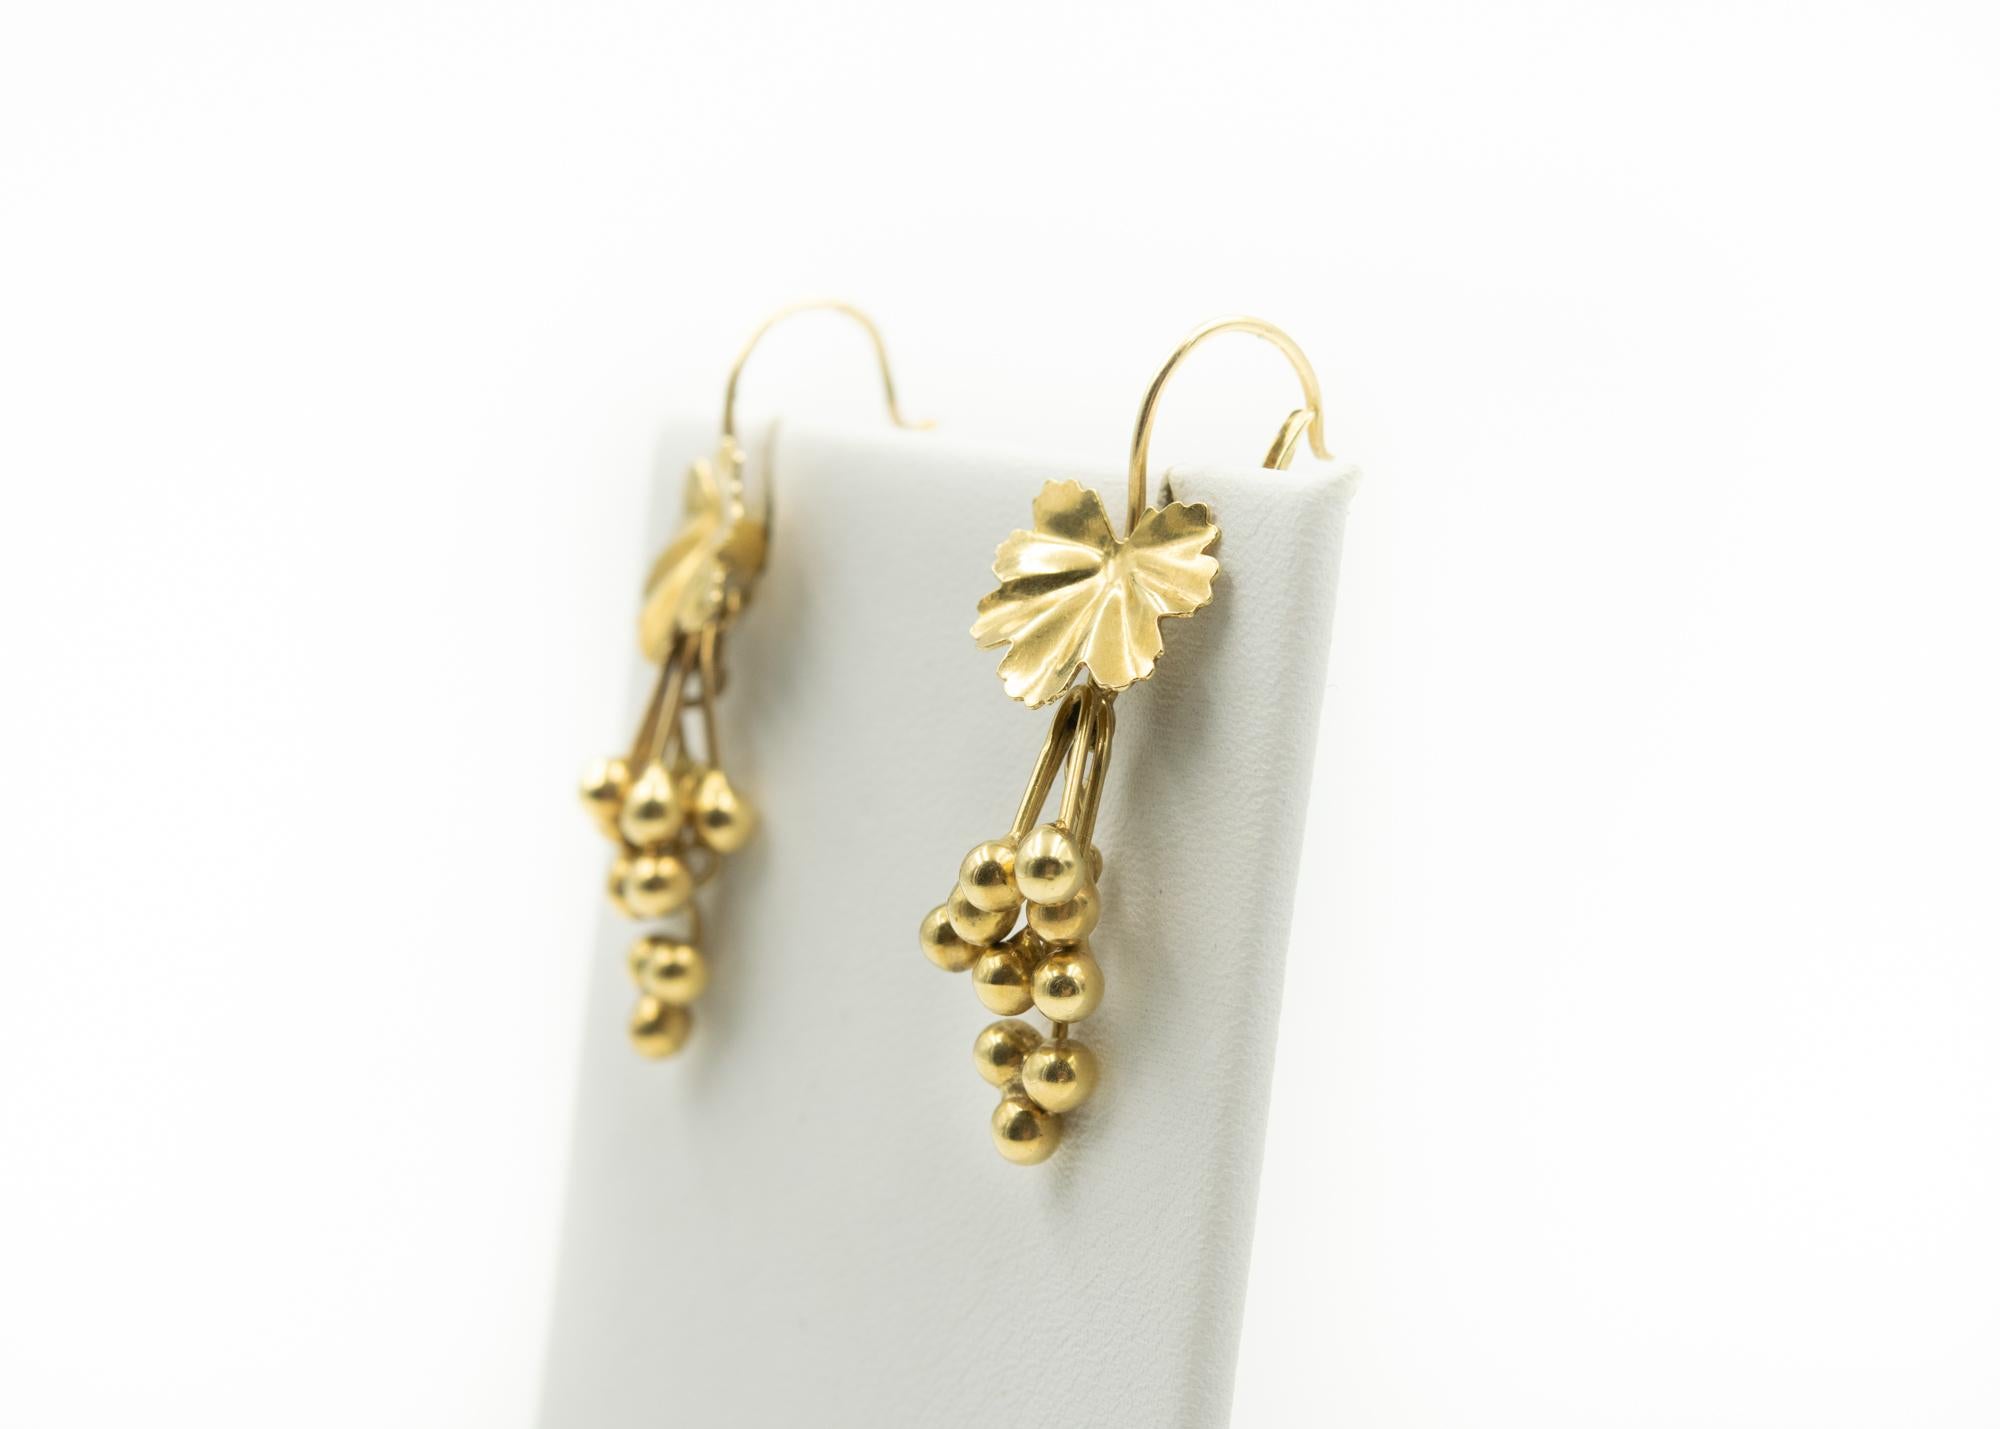 20th Century dangling drop earrings featuring a gold wire that leads to a fluted gold leaf with little balls that dangle at different lengths.  The dangling balls resemble grapes.  The earrings are marked 585 Italy for 14k.  The earrings have